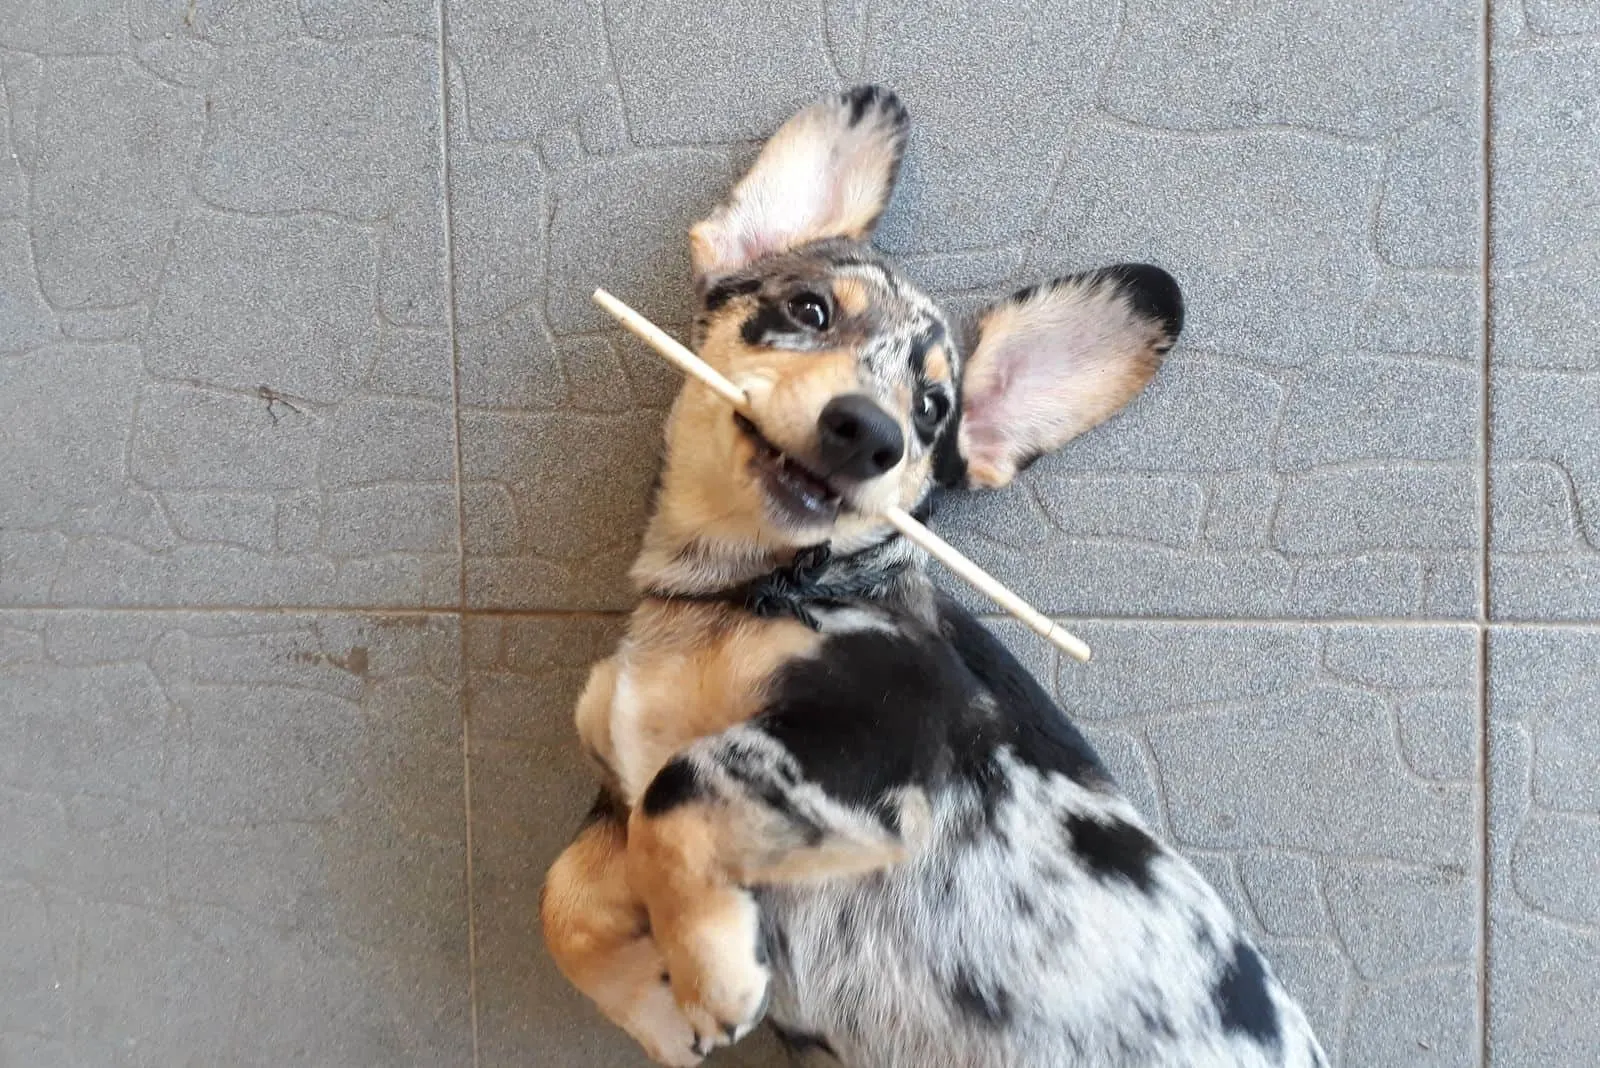 corgi mix dachshund lying down on its back with stick in its mouth